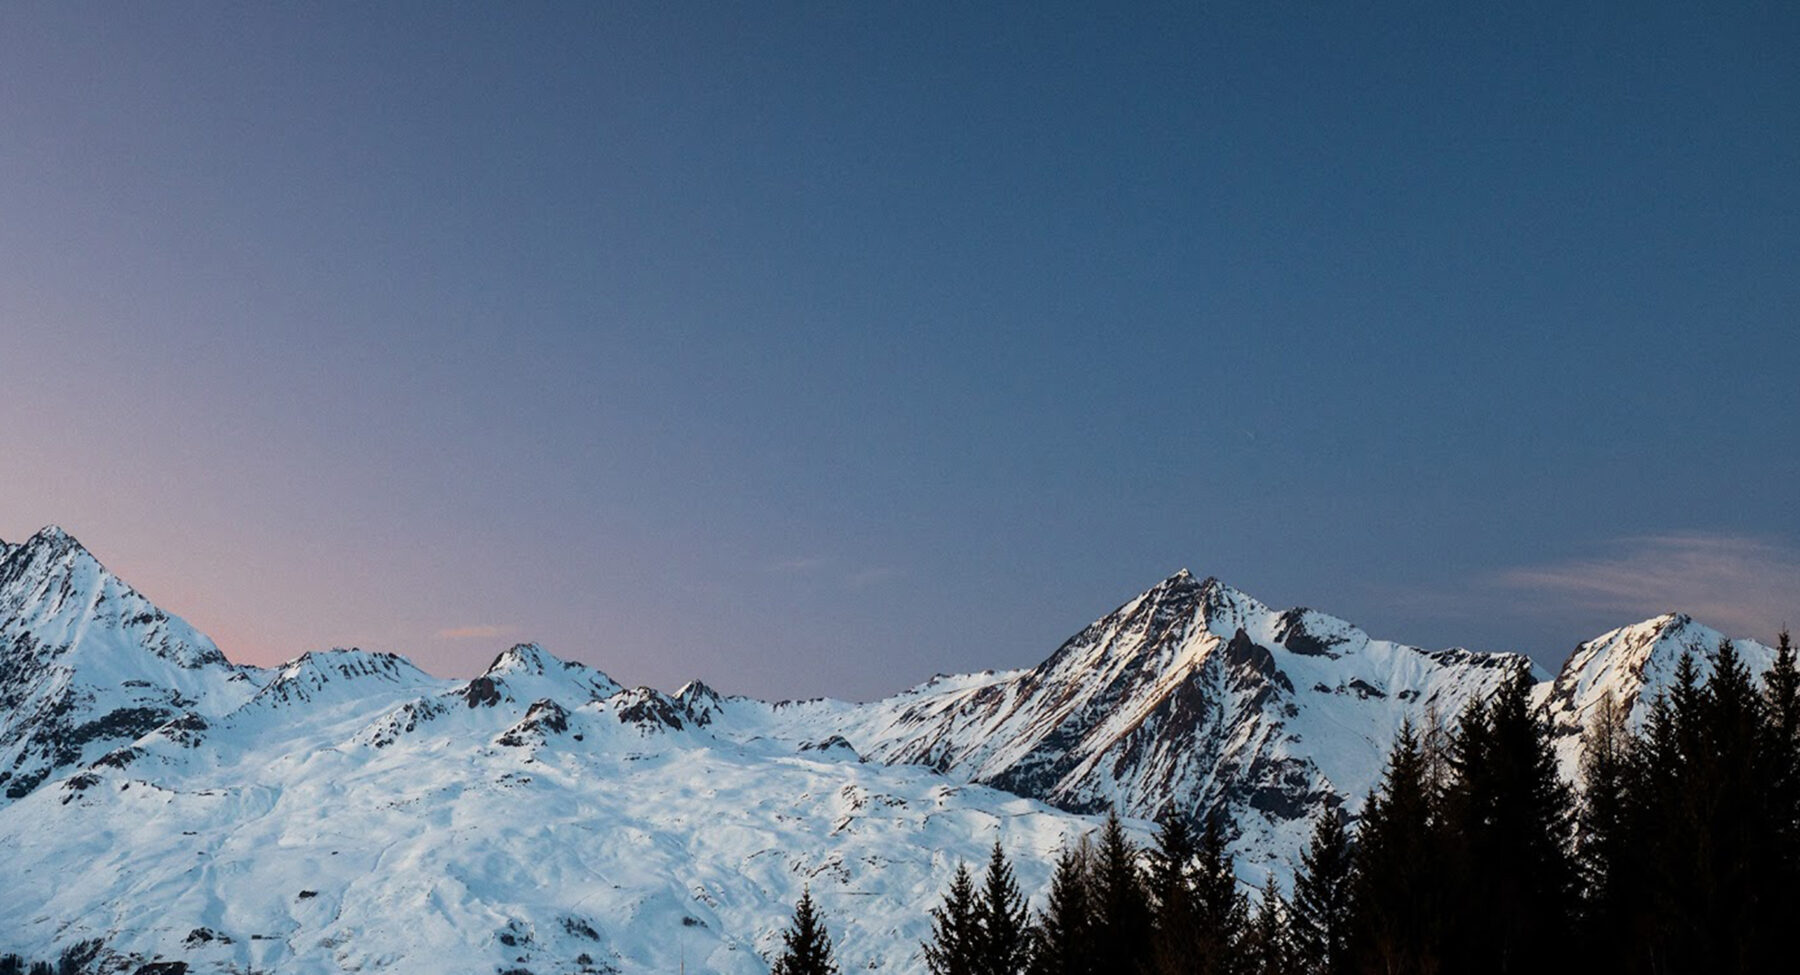 Sunset over the trees and mountains at Les Arcs 2000